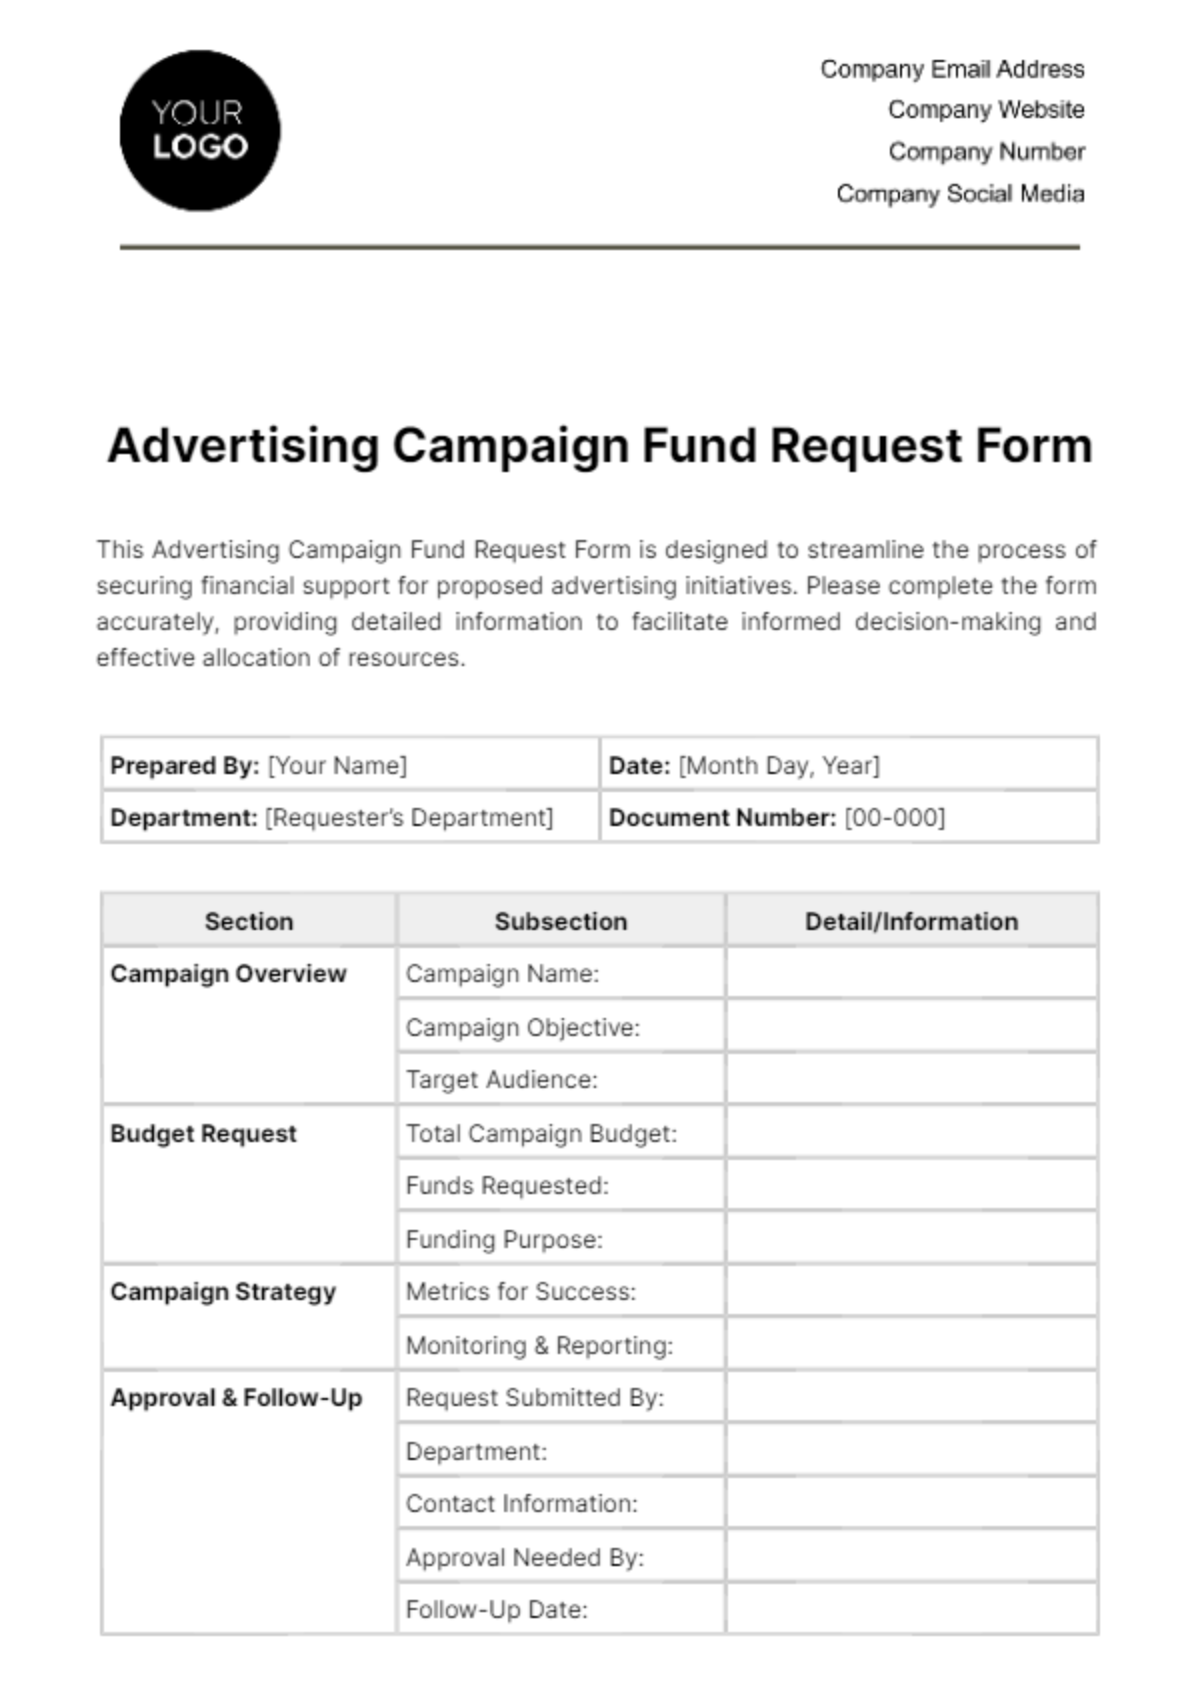 Advertising Campaign Fund Request Form Template